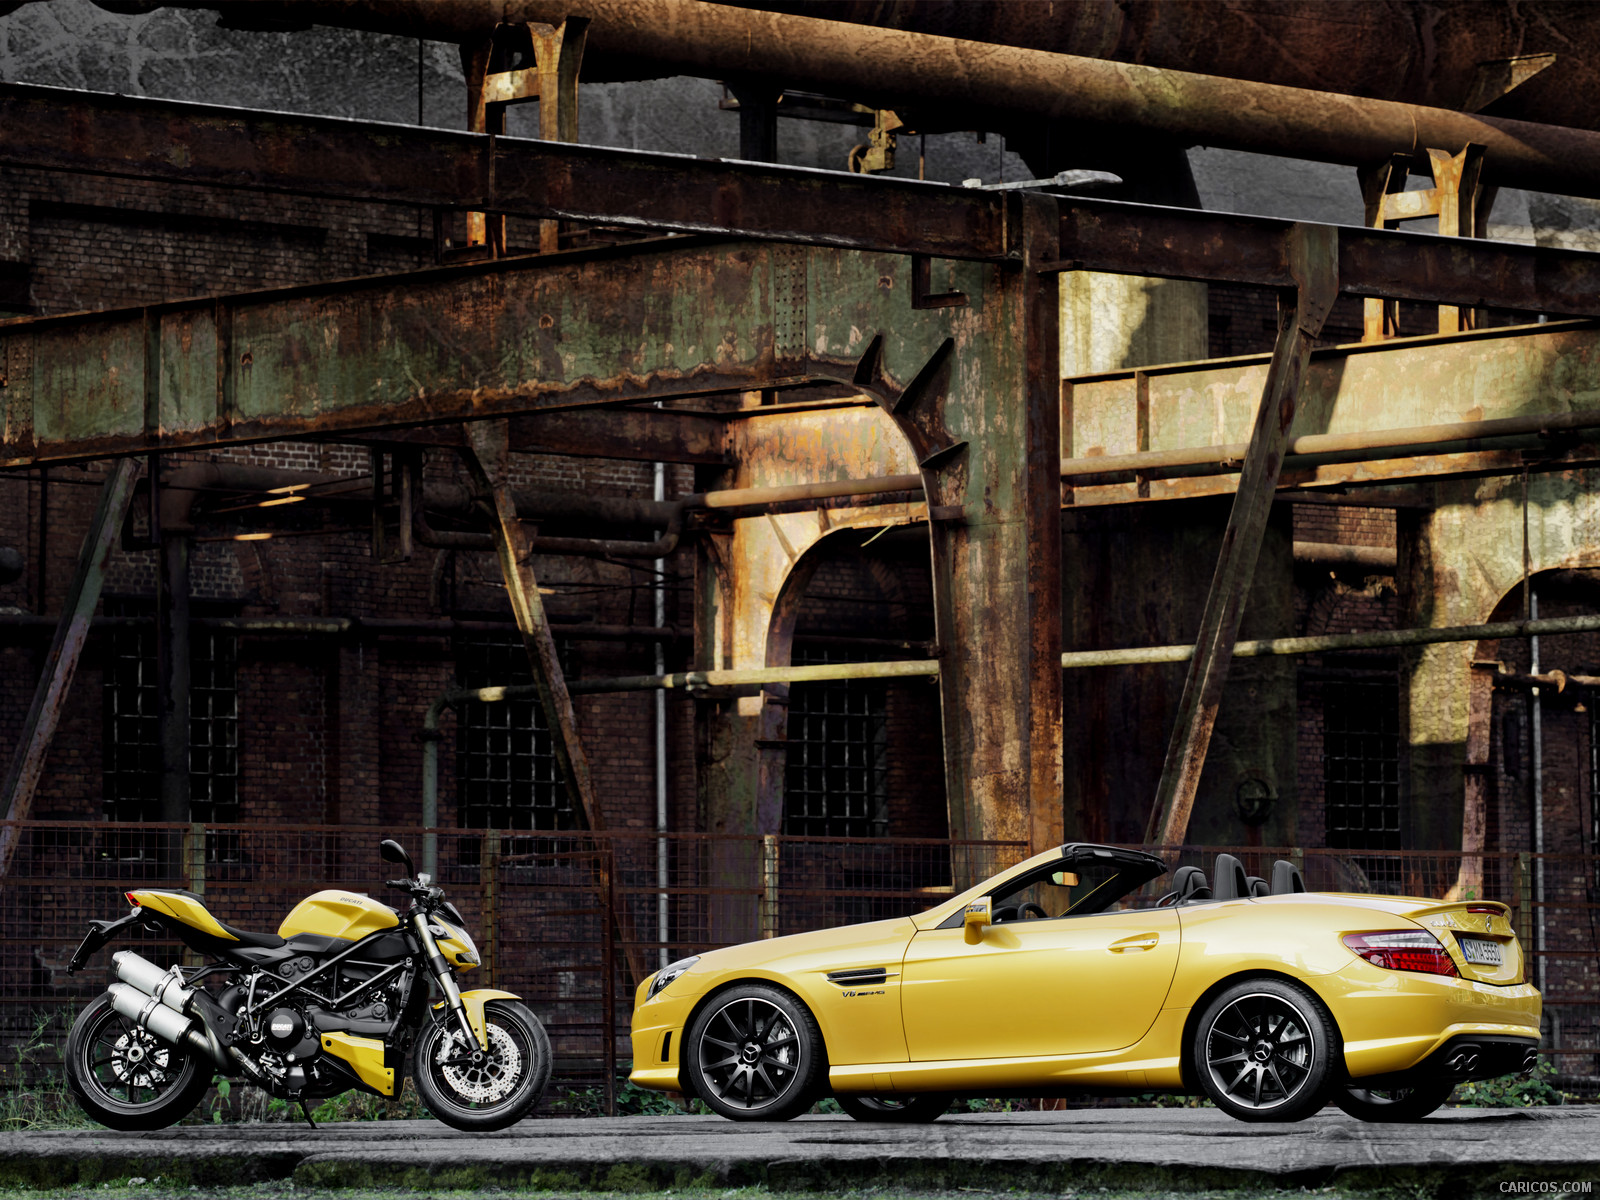 Mercedes-Benz SLK 55 AMG and Ducati Streetfighter 848 - , #41 of 47